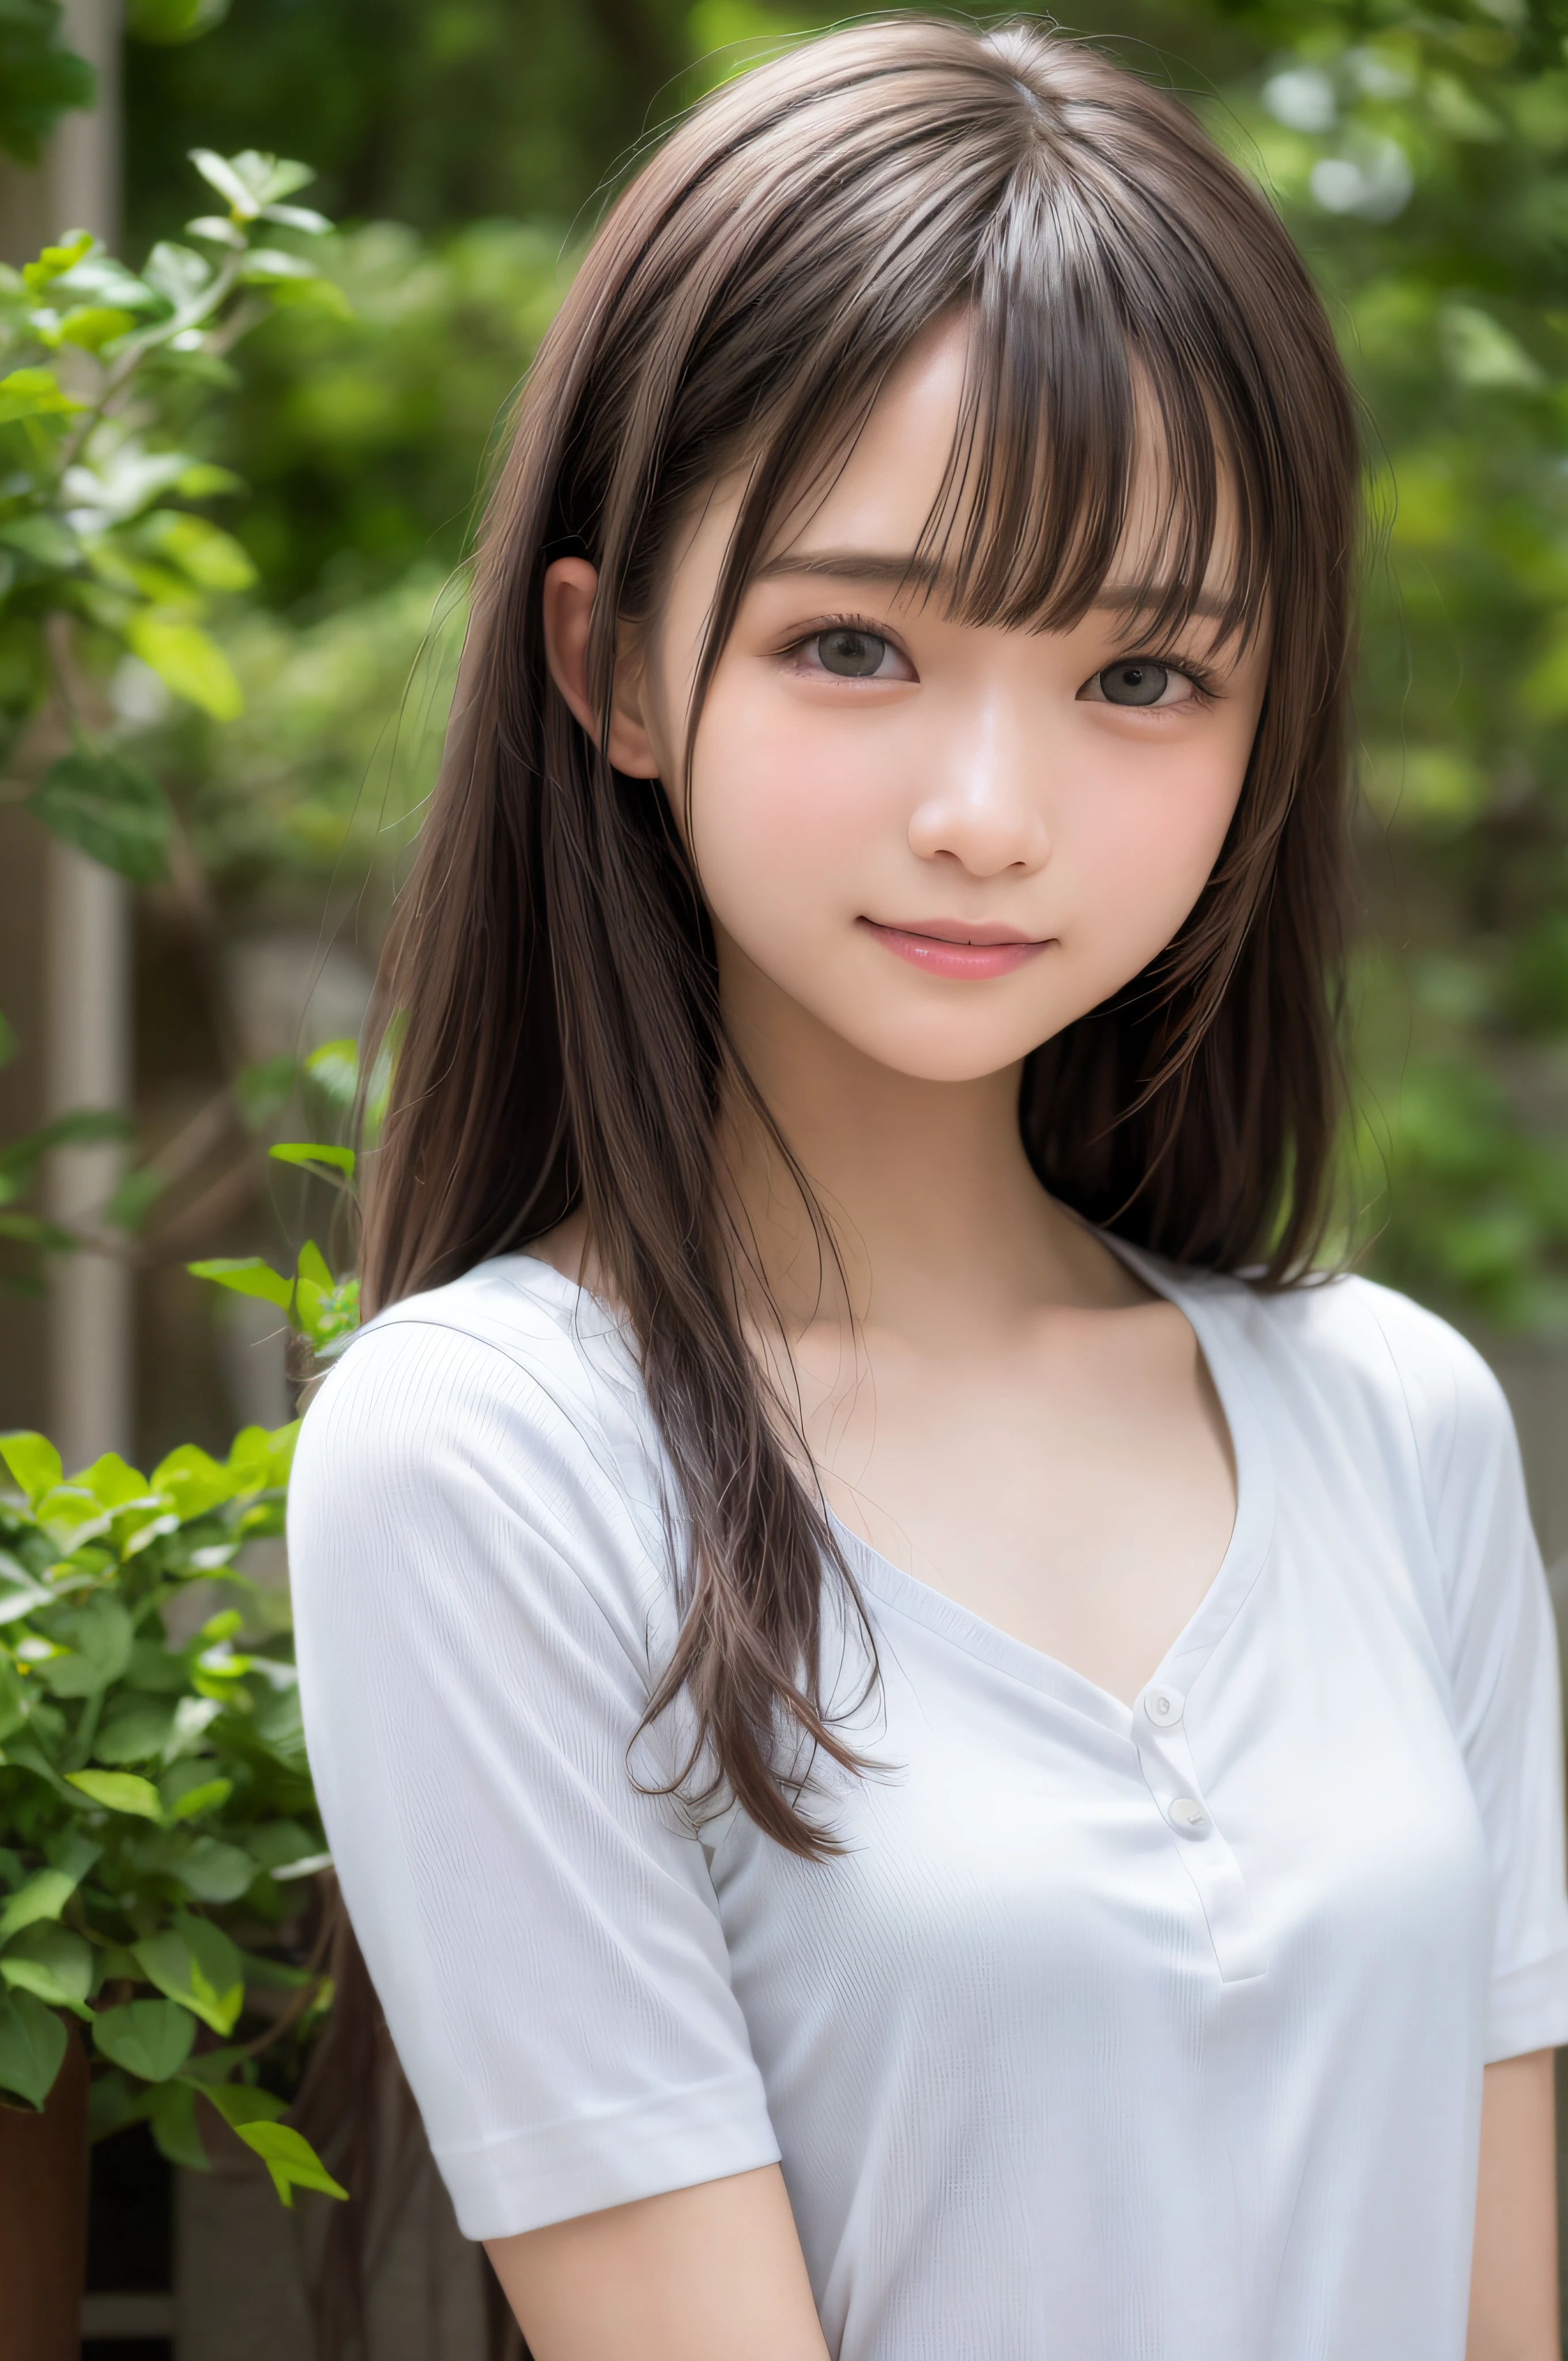 top-quality、​masterpiece)、White background、blurry backround、1girl、a beauty  girl、small tits、Shyness、red blush、超A high resolution、Beautie、cute little、solo、A  Japanese Lady。15yo student、hi-school girl、a smile。Beautiful young woman  model